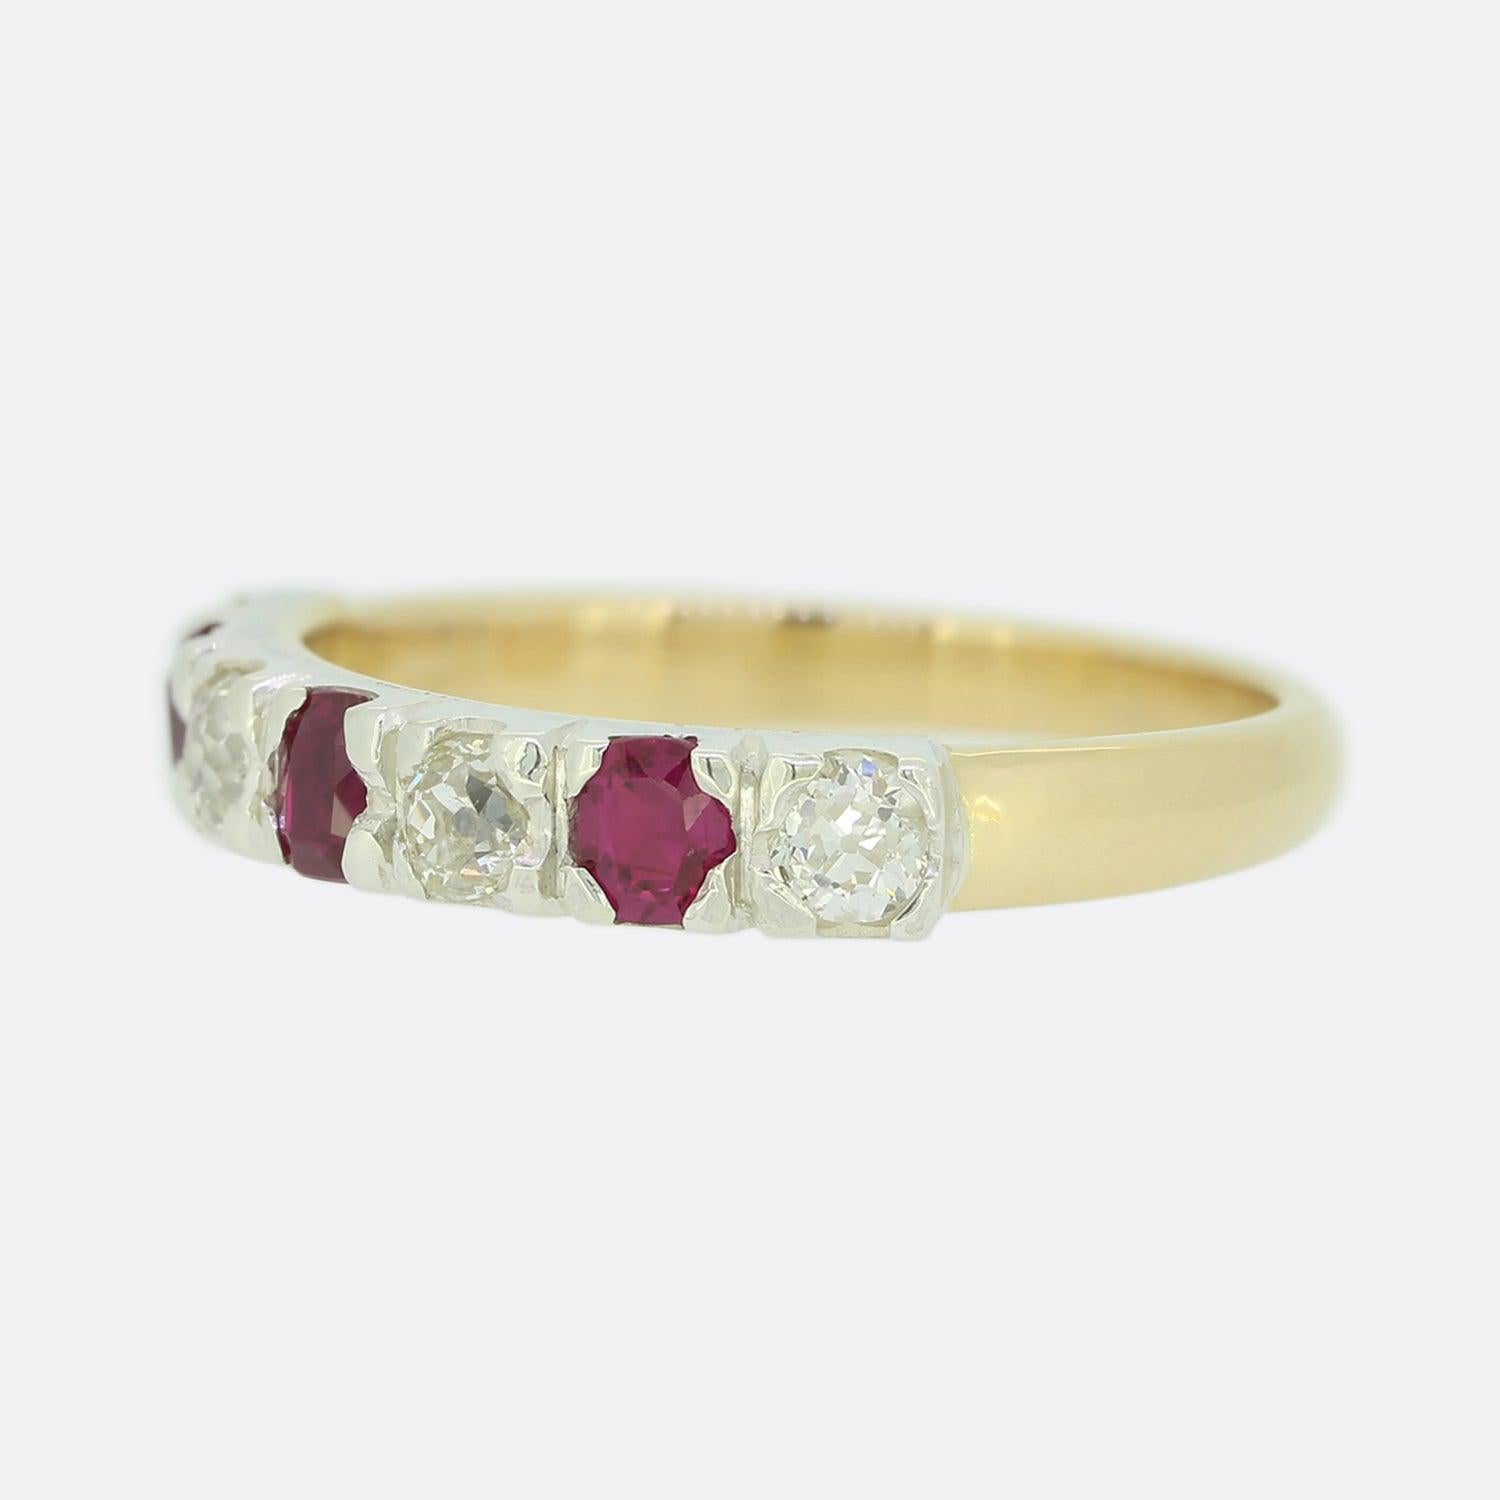 Here we have a vintage 18ct yellow gold ruby and old cut diamond band ring. Each stone here is round faceted and has been claw set in white gold in an alternating fashion across the face. 

Condition: Used (Very Good)
Weight: 2.9 grams
Size: N